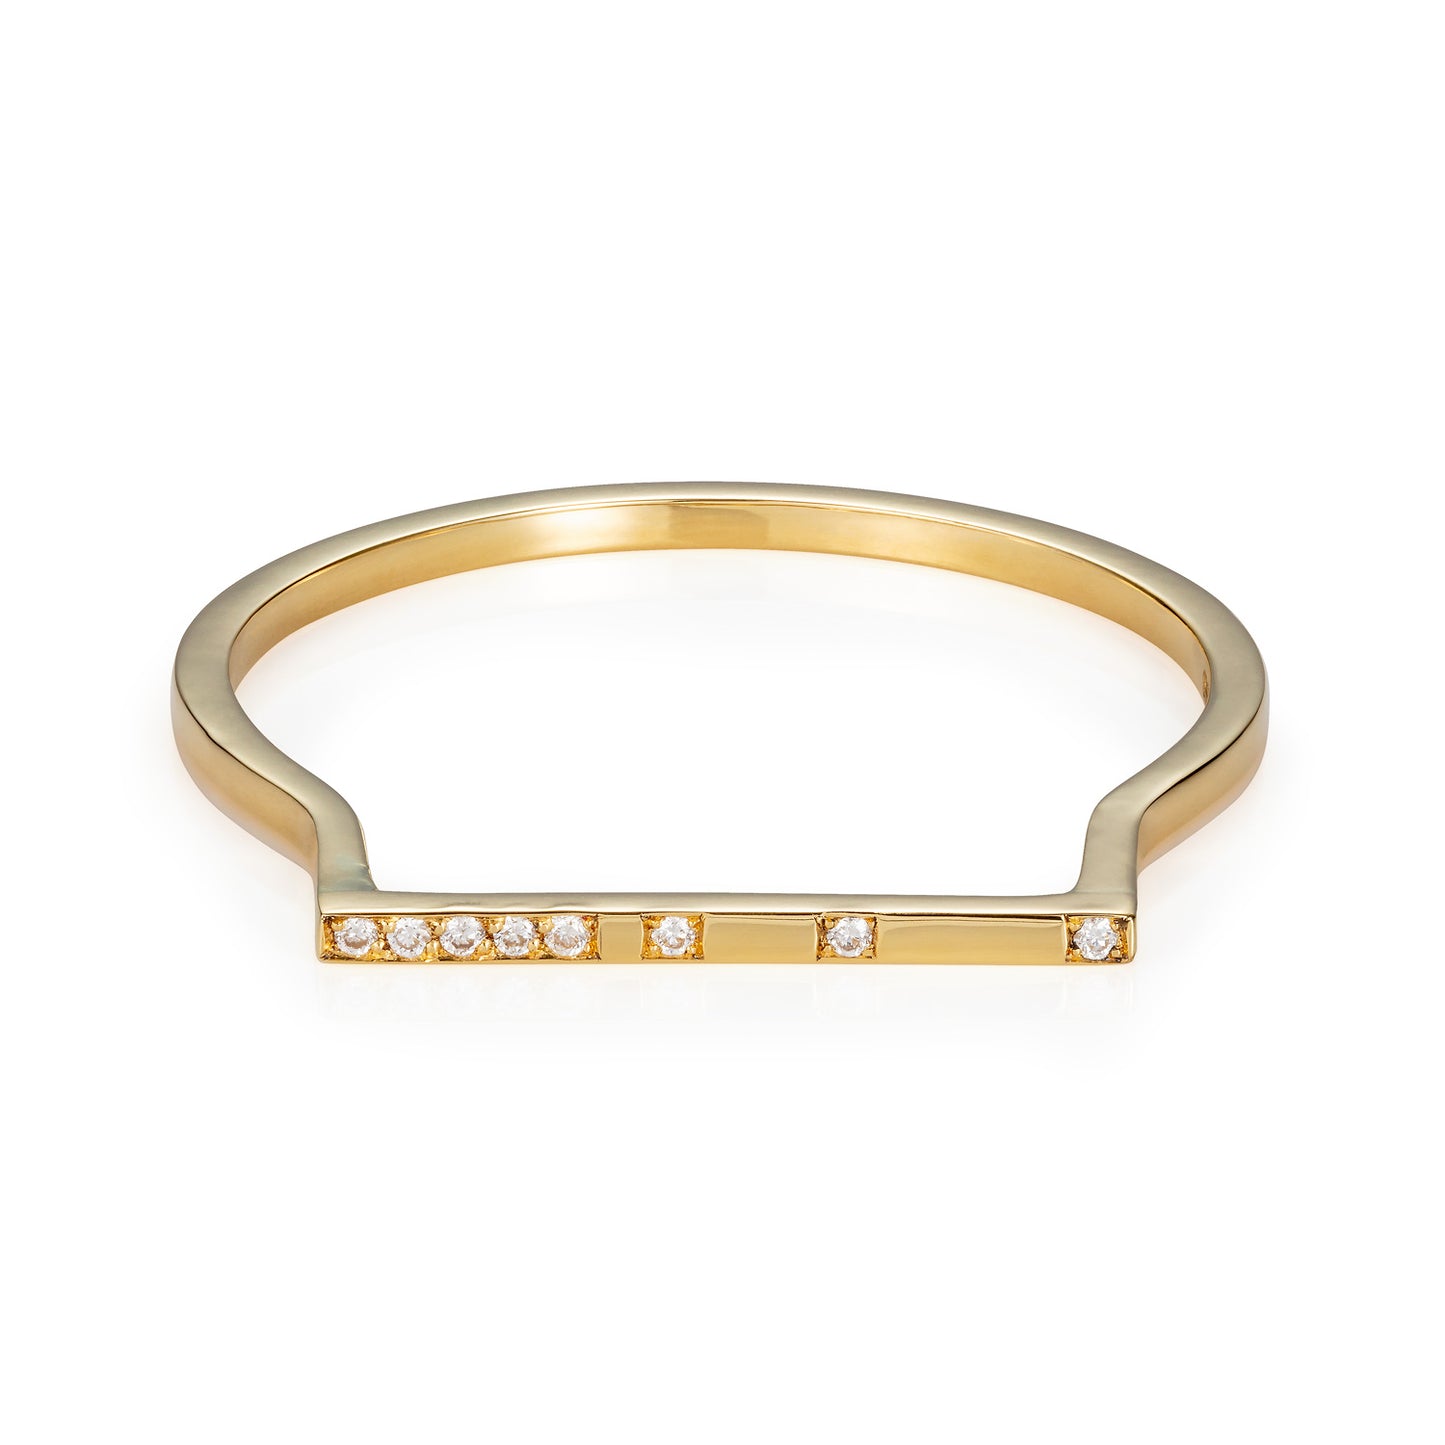 18 CT YELLOW GOLD RING WITH DIAMOND PAVE RAISED BAR